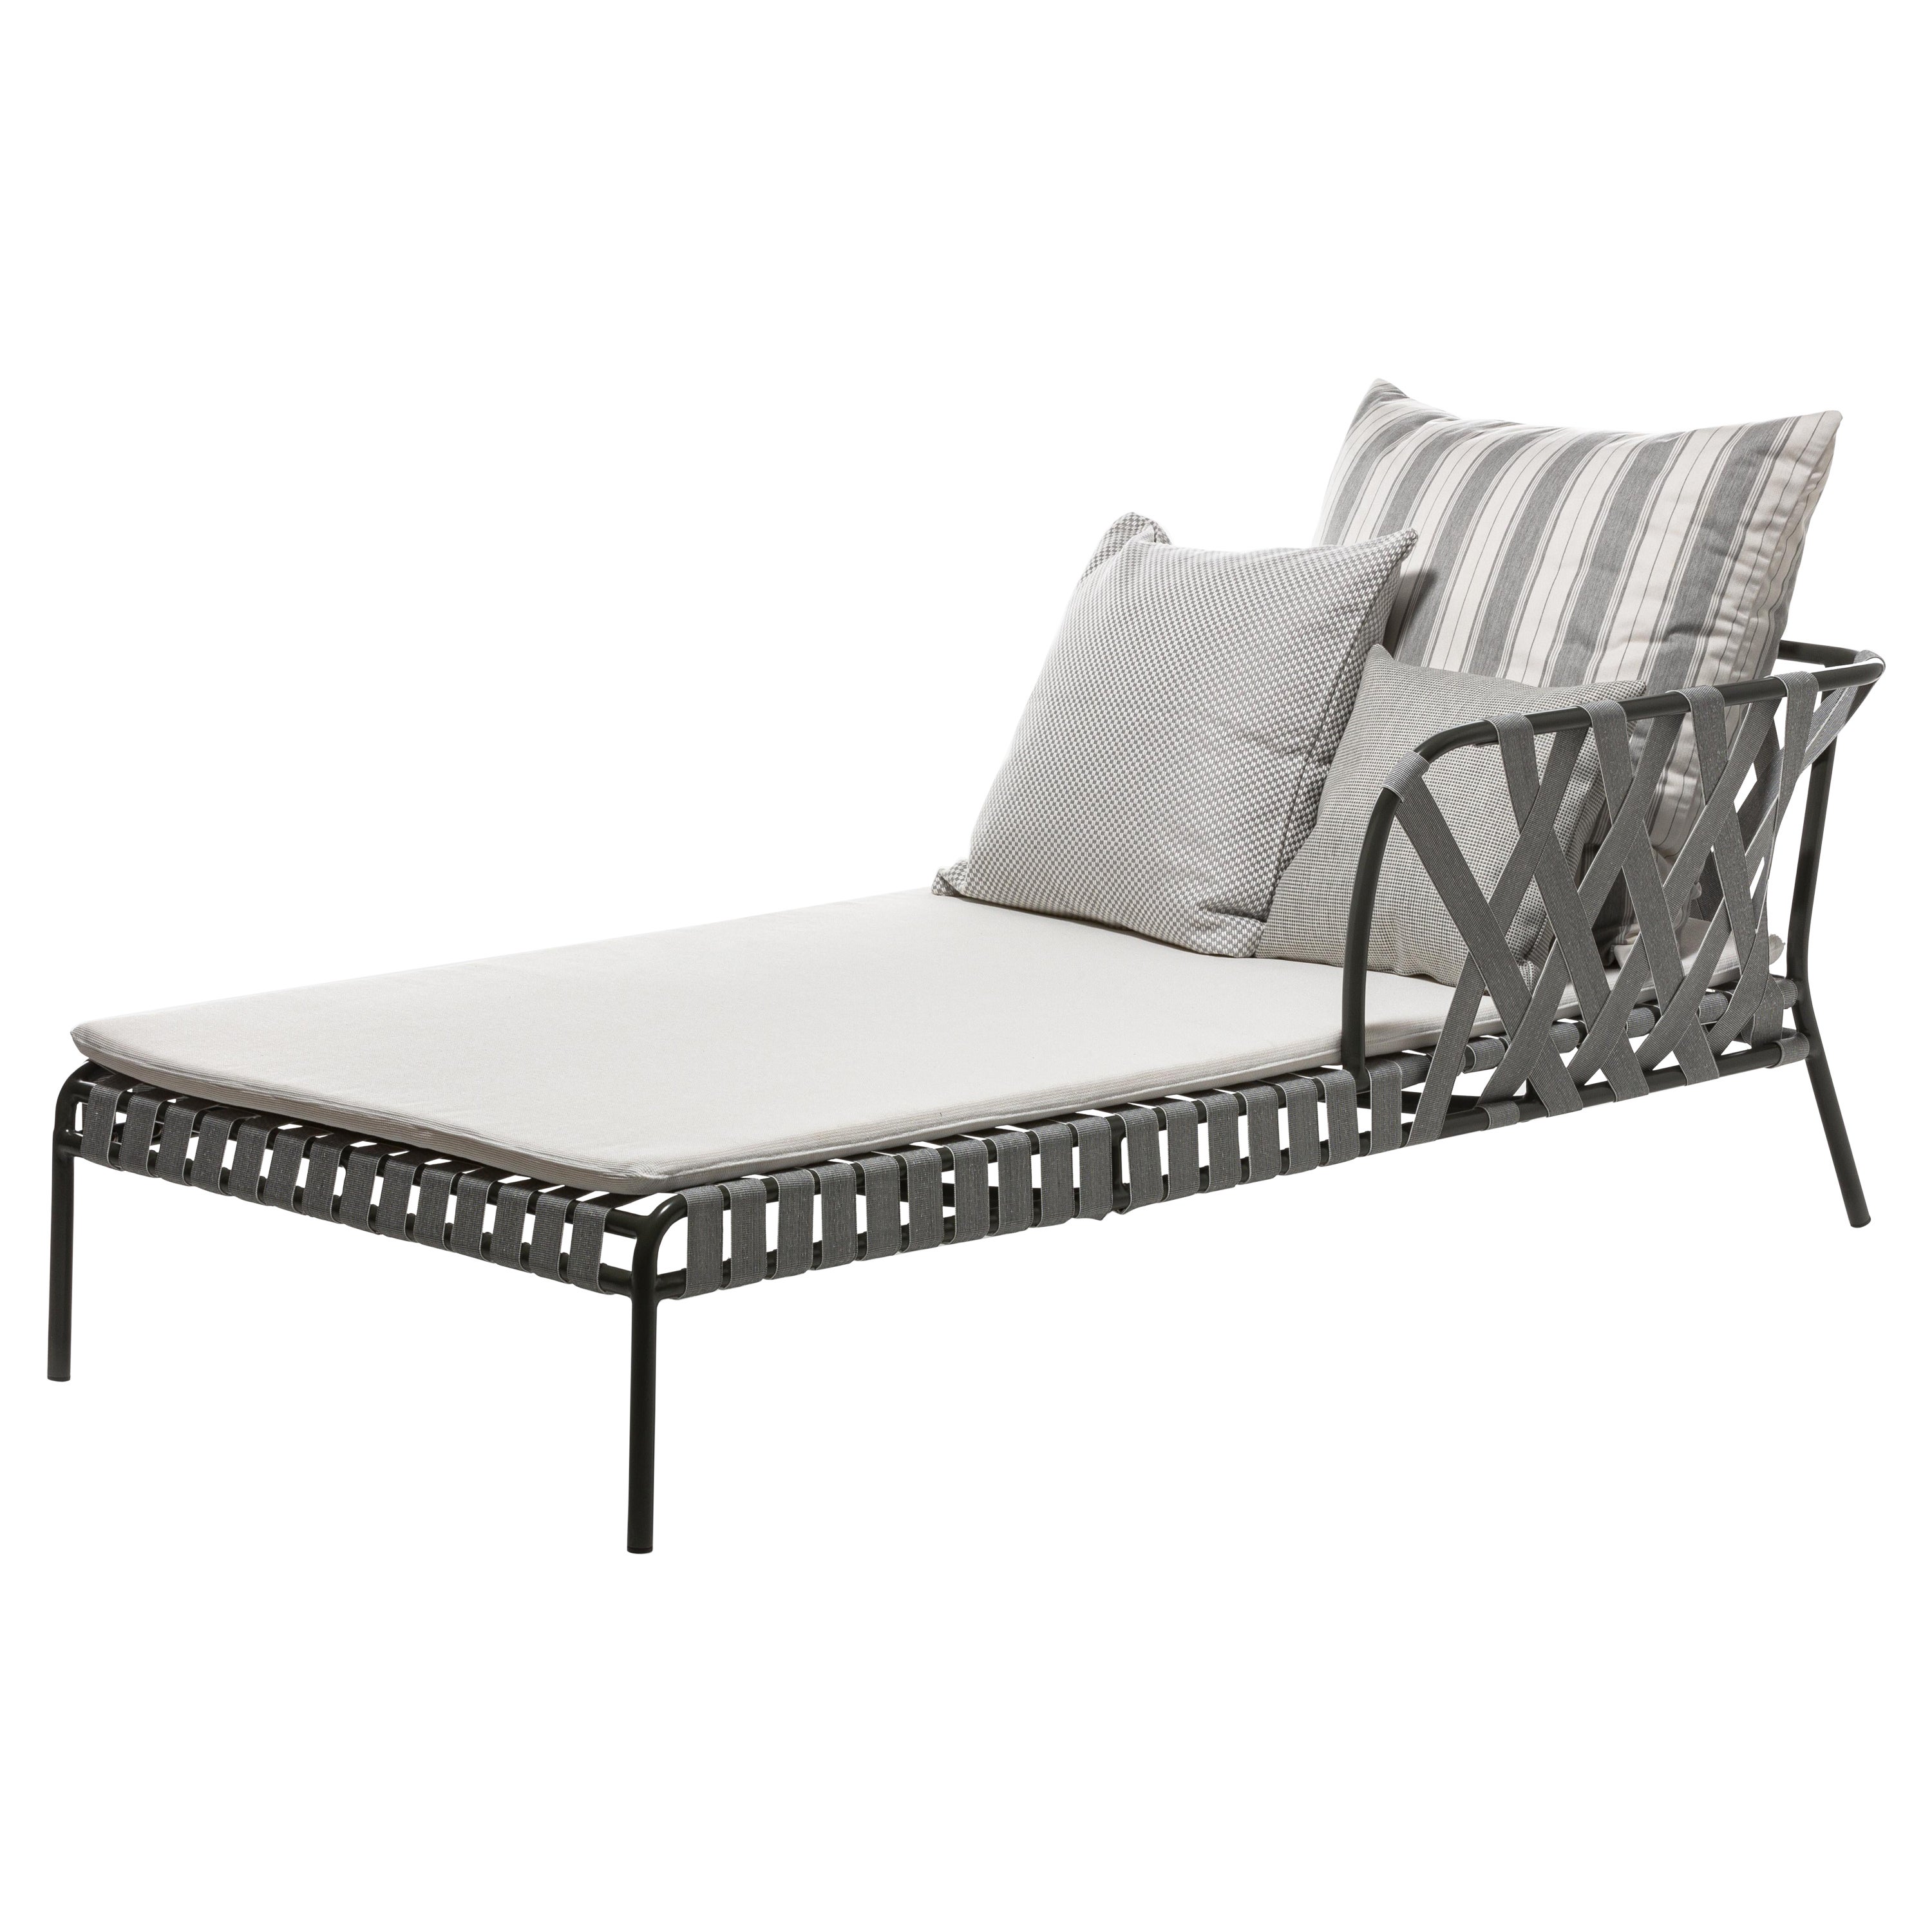 Gervasoni Inout Day Bed in Aspen 01 Upholstery with Grey Aluminium Frame For Sale